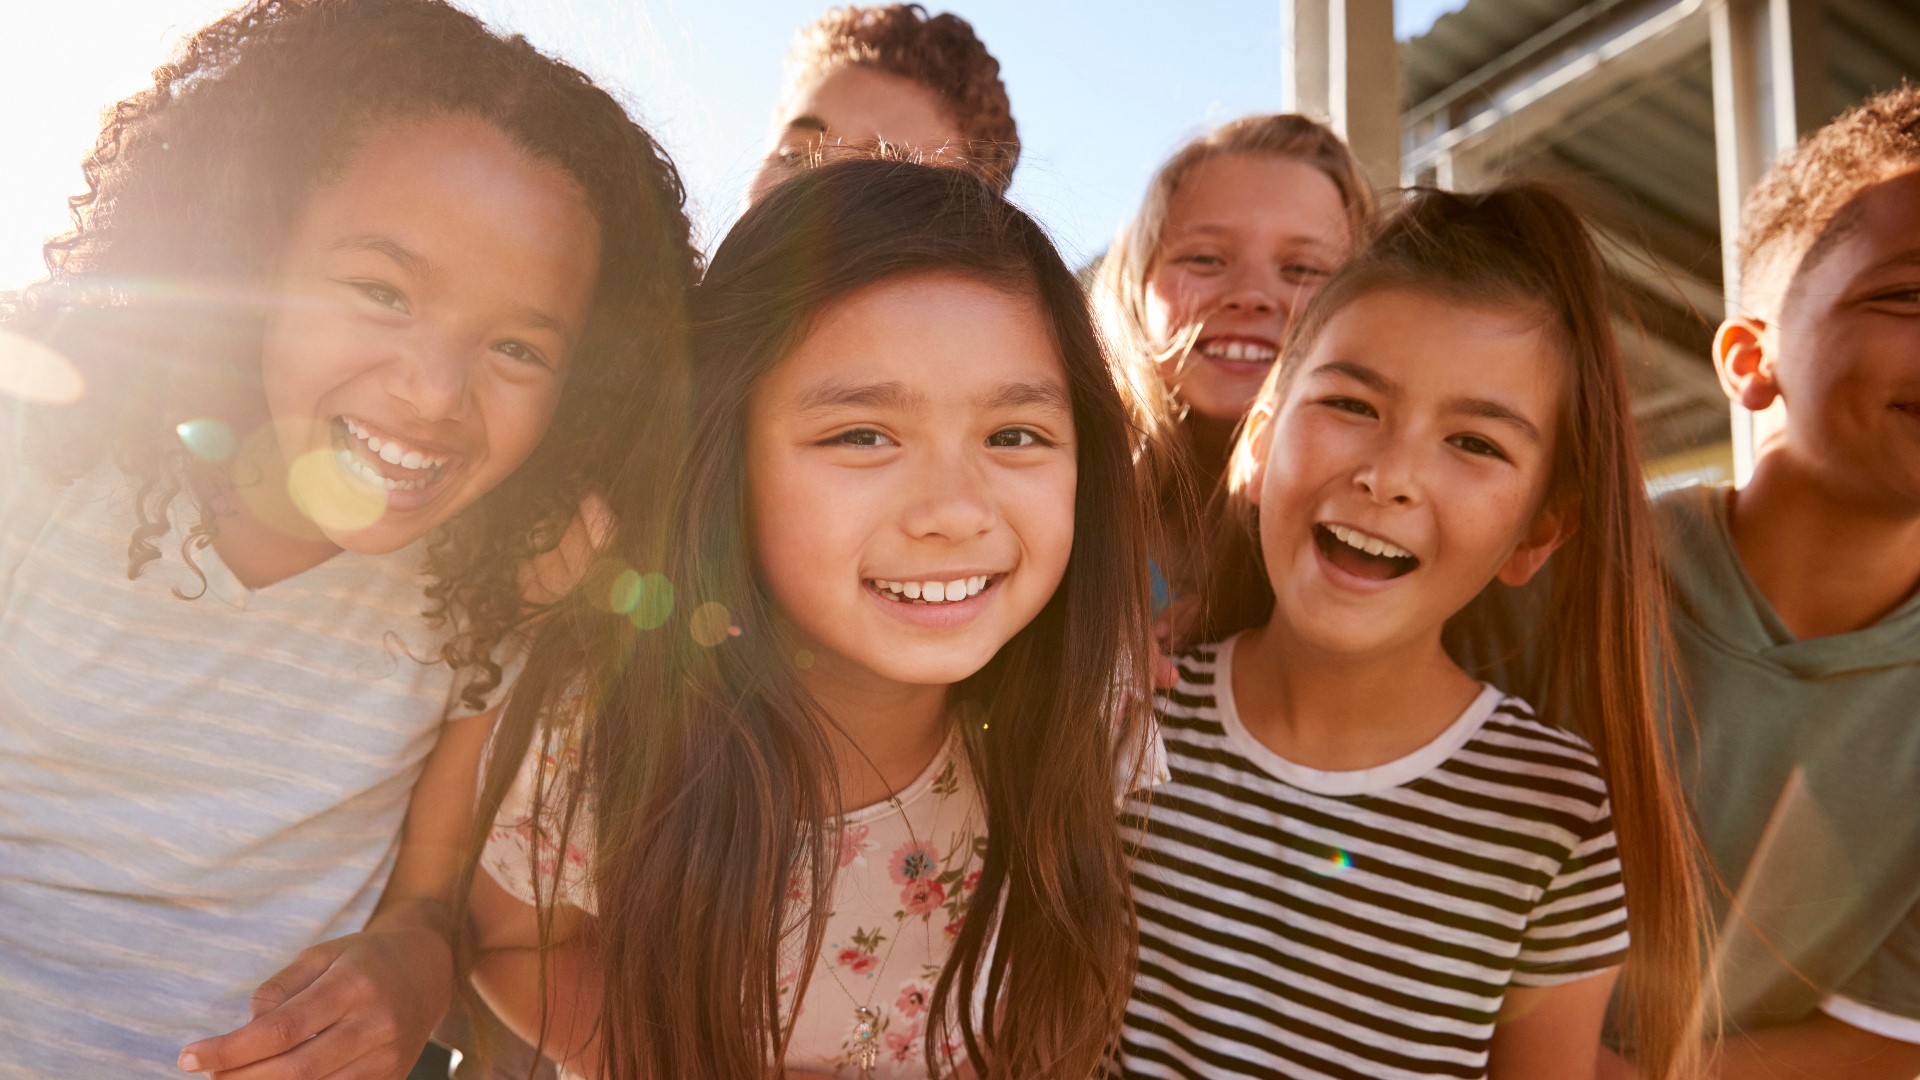 Building your kids’ emotional intelligence can help them practice healthy behaviors and reach their full potential. Sponsored by Allegro Pediatrics.